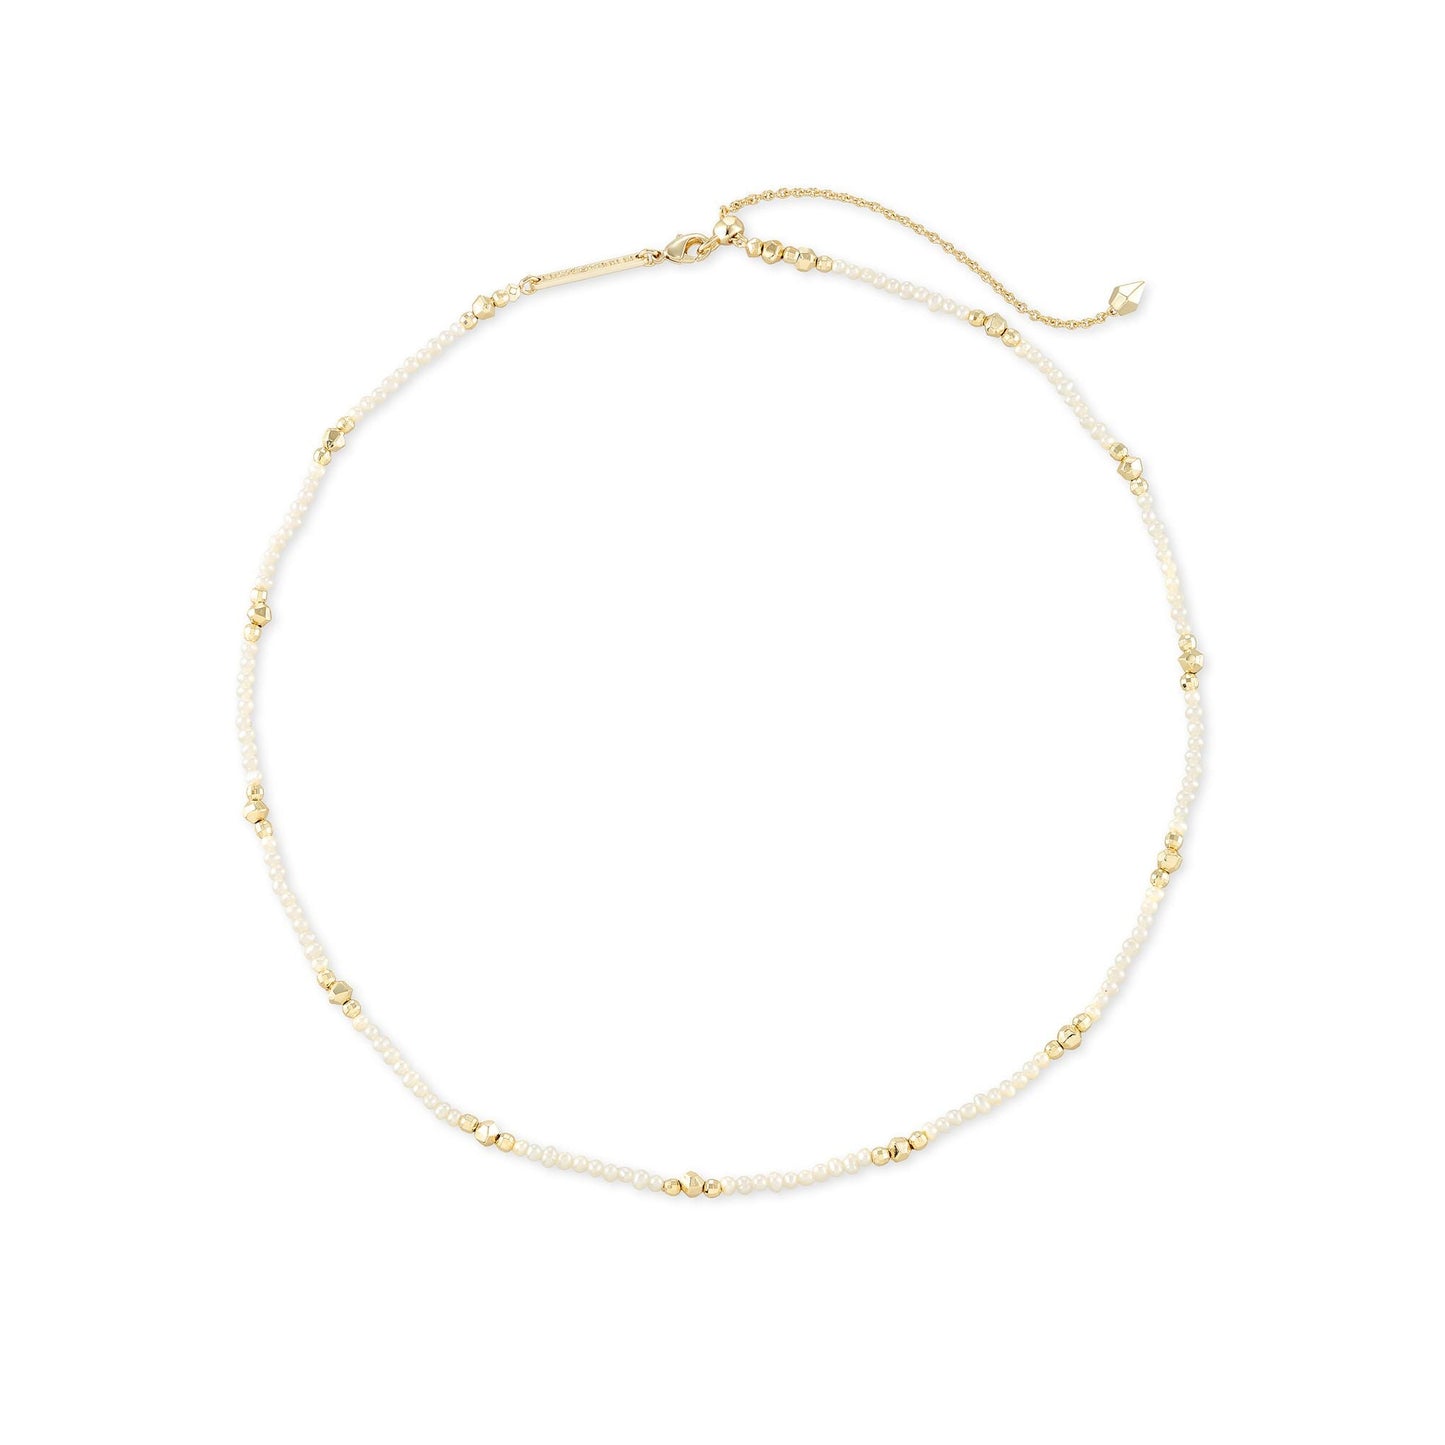 Scarlet Choker Necklace in Gold White Pearl